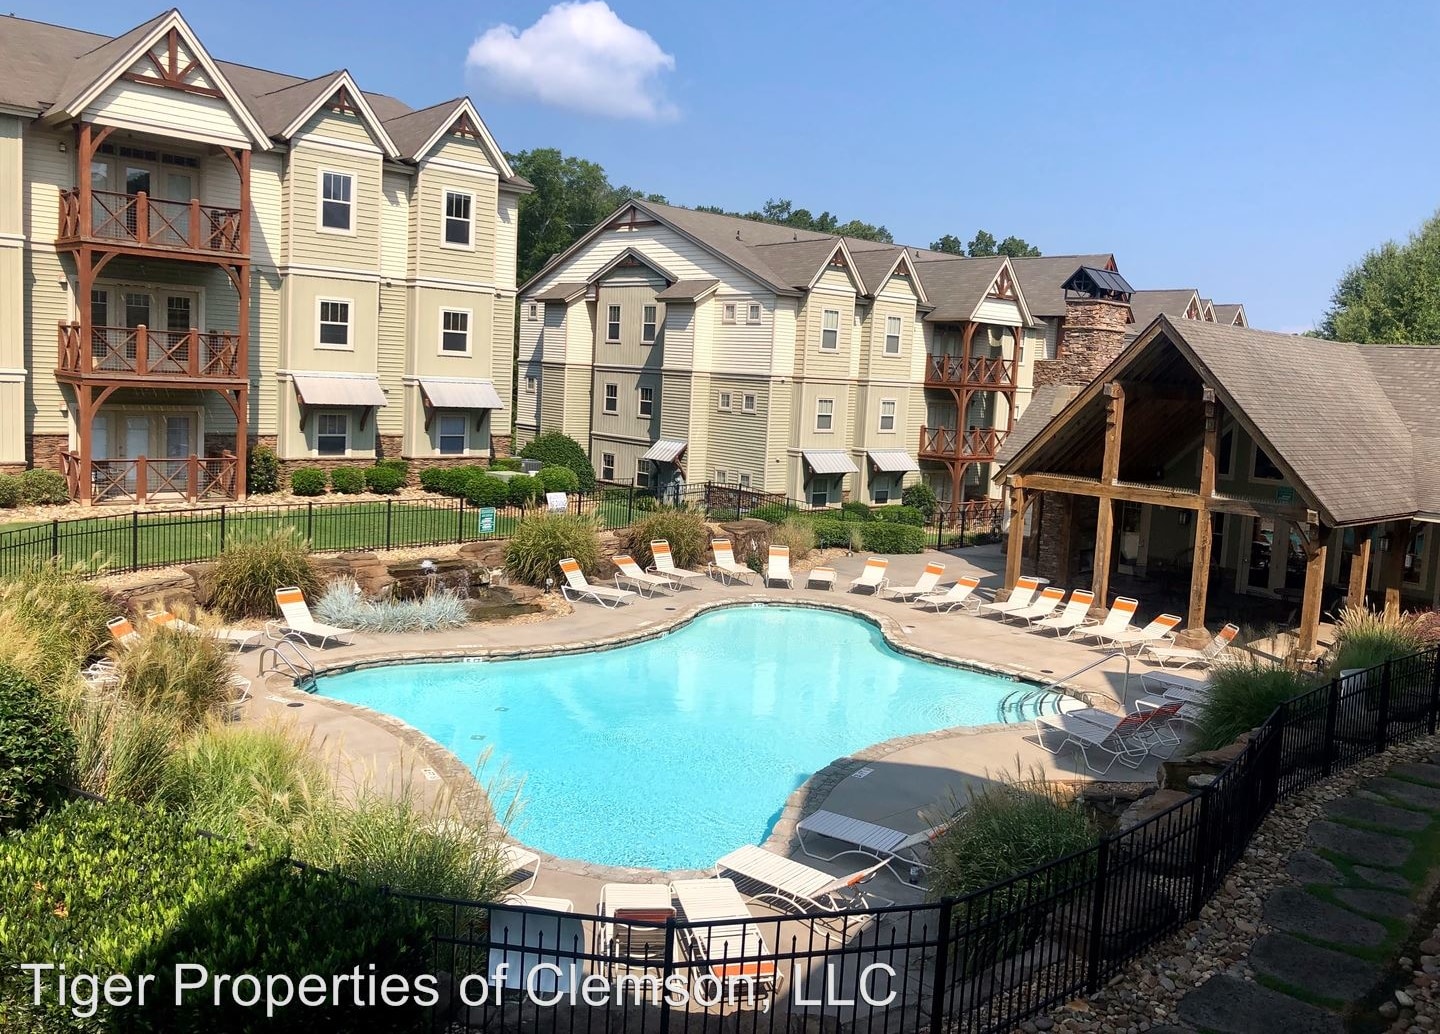 20 Best Apartments Near Clemson University With Pictures